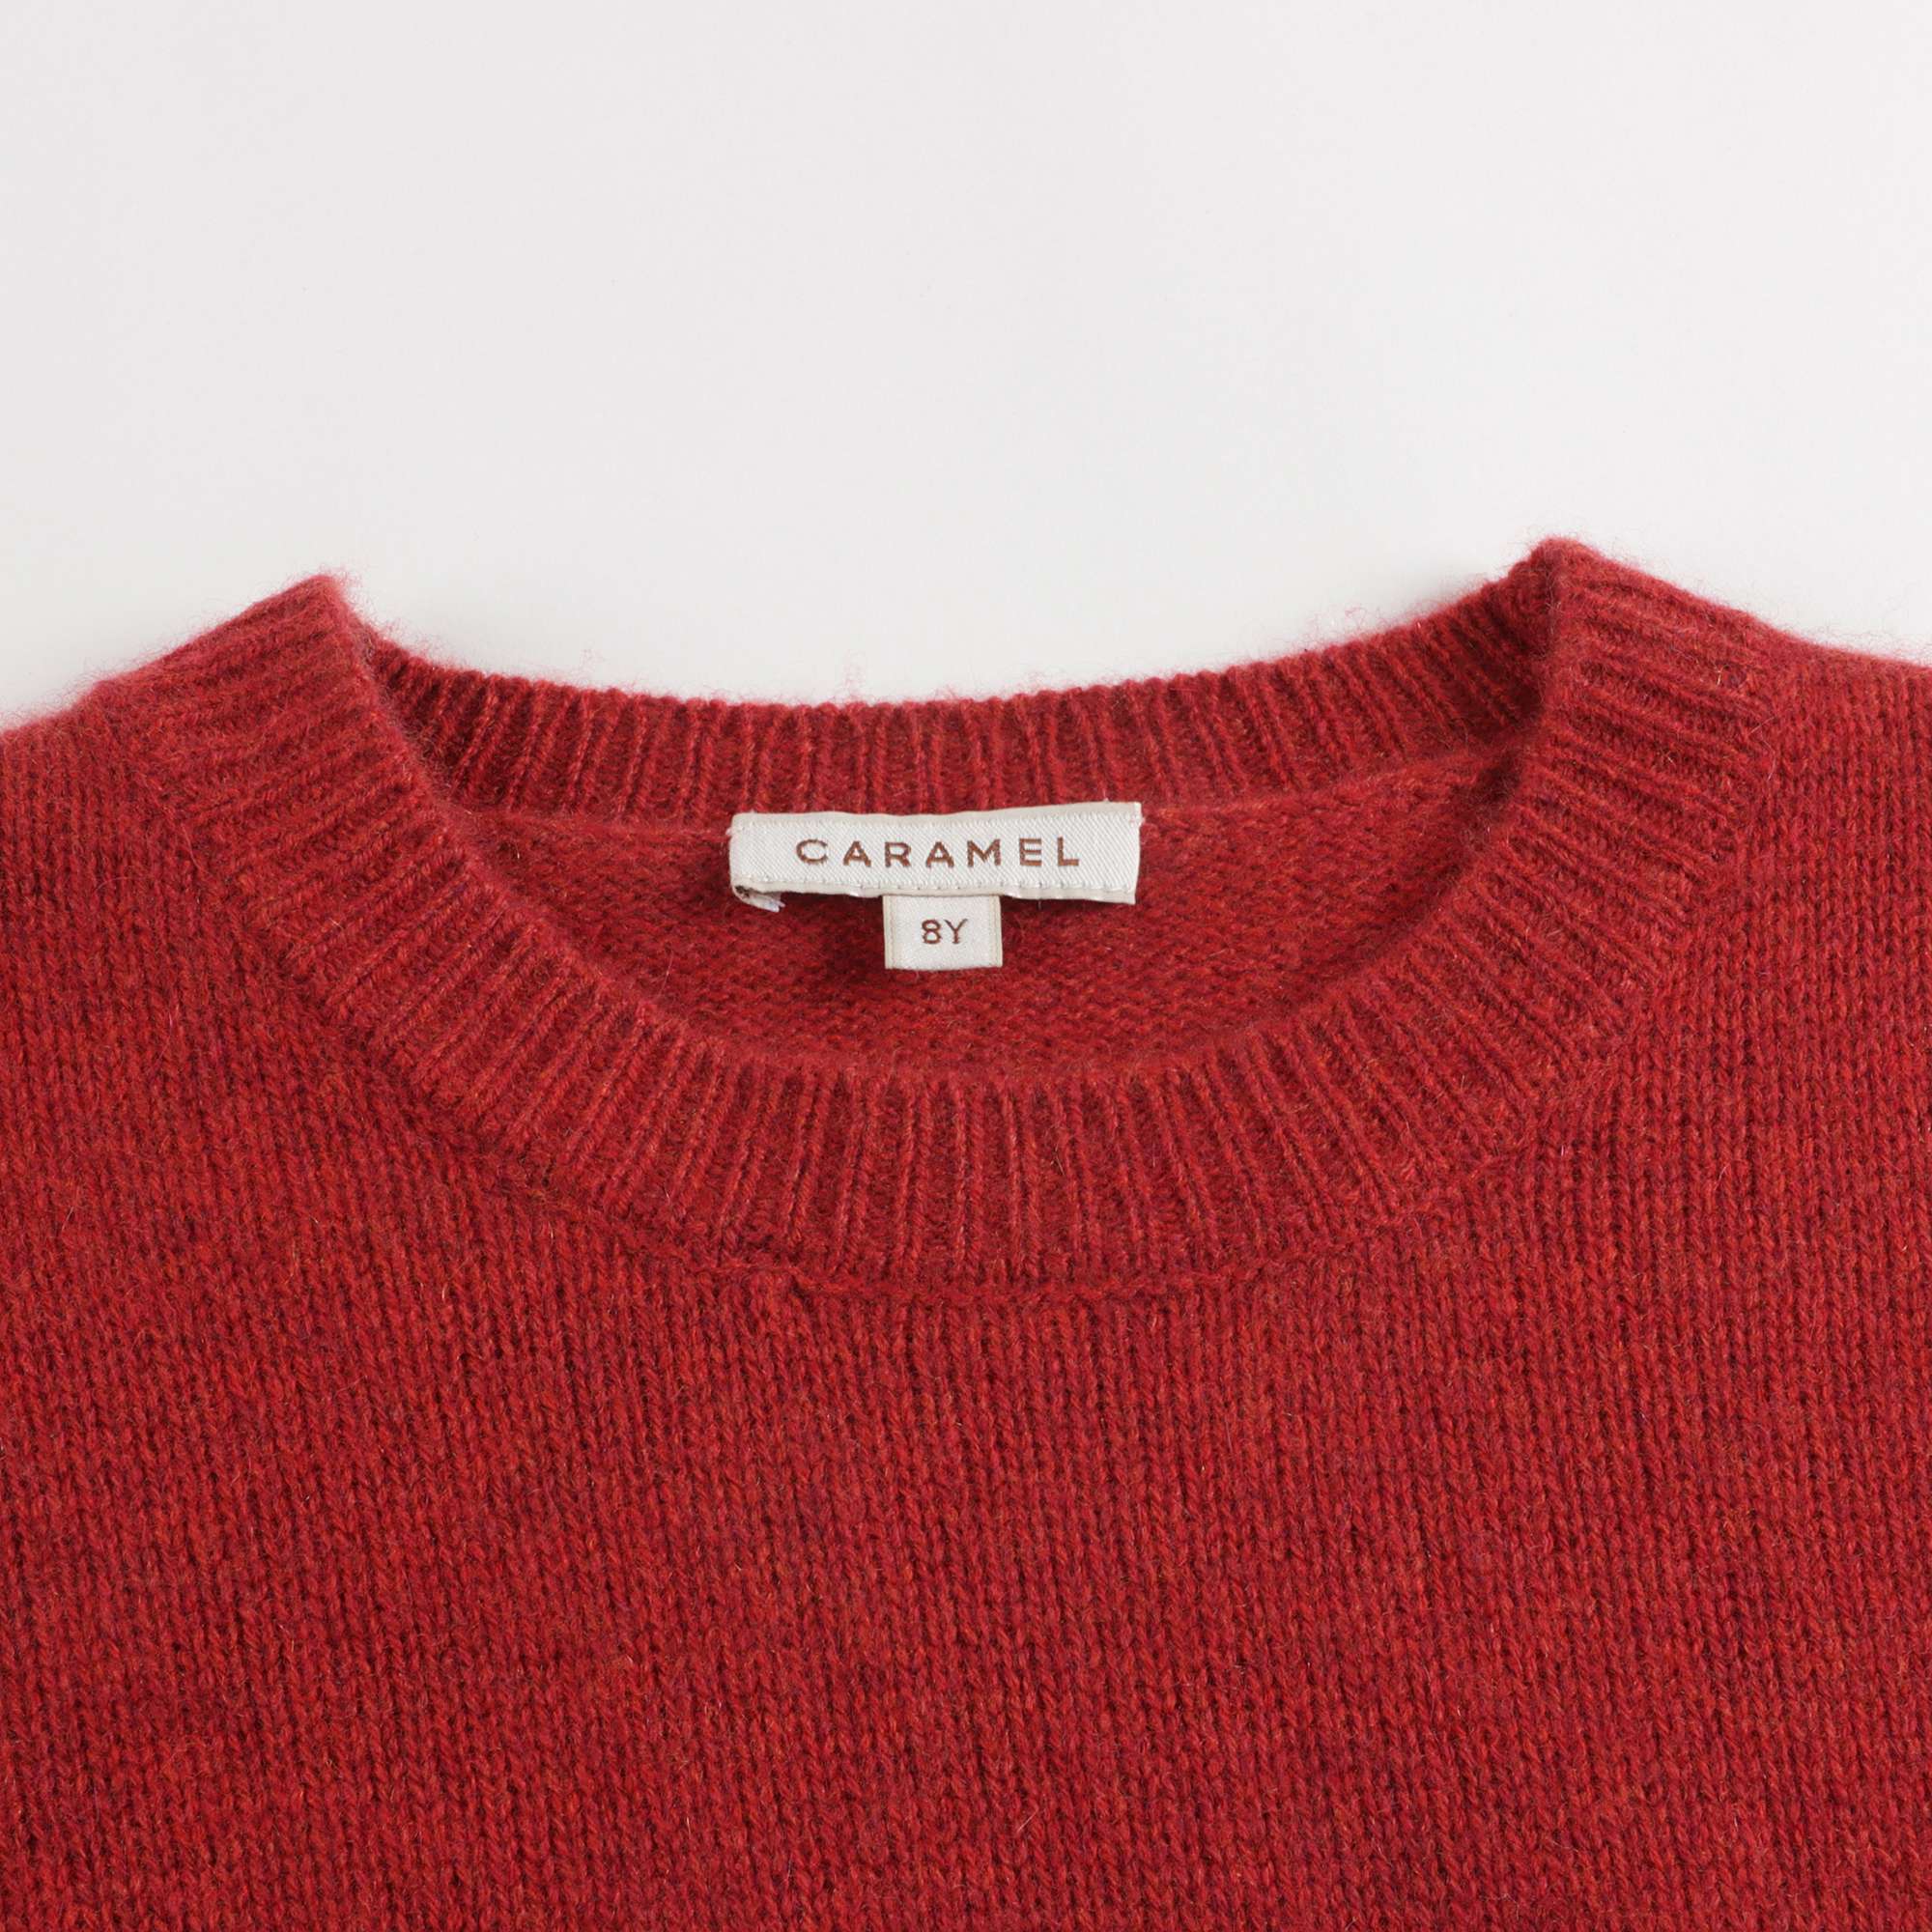 Boys & Girls Red Cashmere Sweater